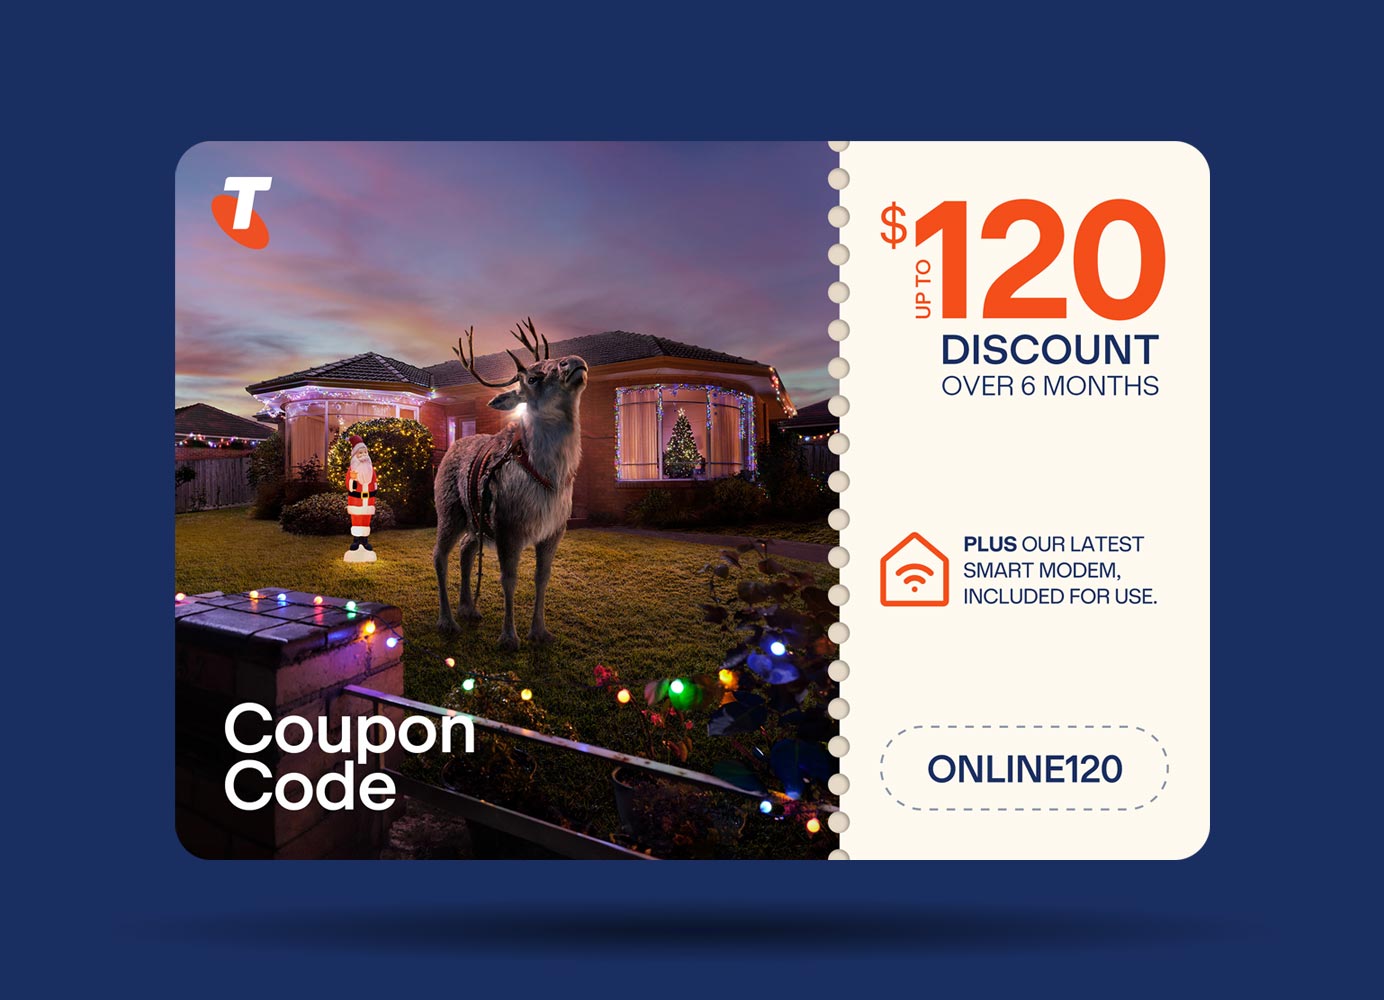 Australian holiday charm: Reindeer, Christmas lights, and blow-up Santa in a front garden at night. Save up to $120 over six months with coupon code 'ONLINE120.'  Includes smart modem. The image captures the perfect blend of Christmas spirit and an enticing discount offer.